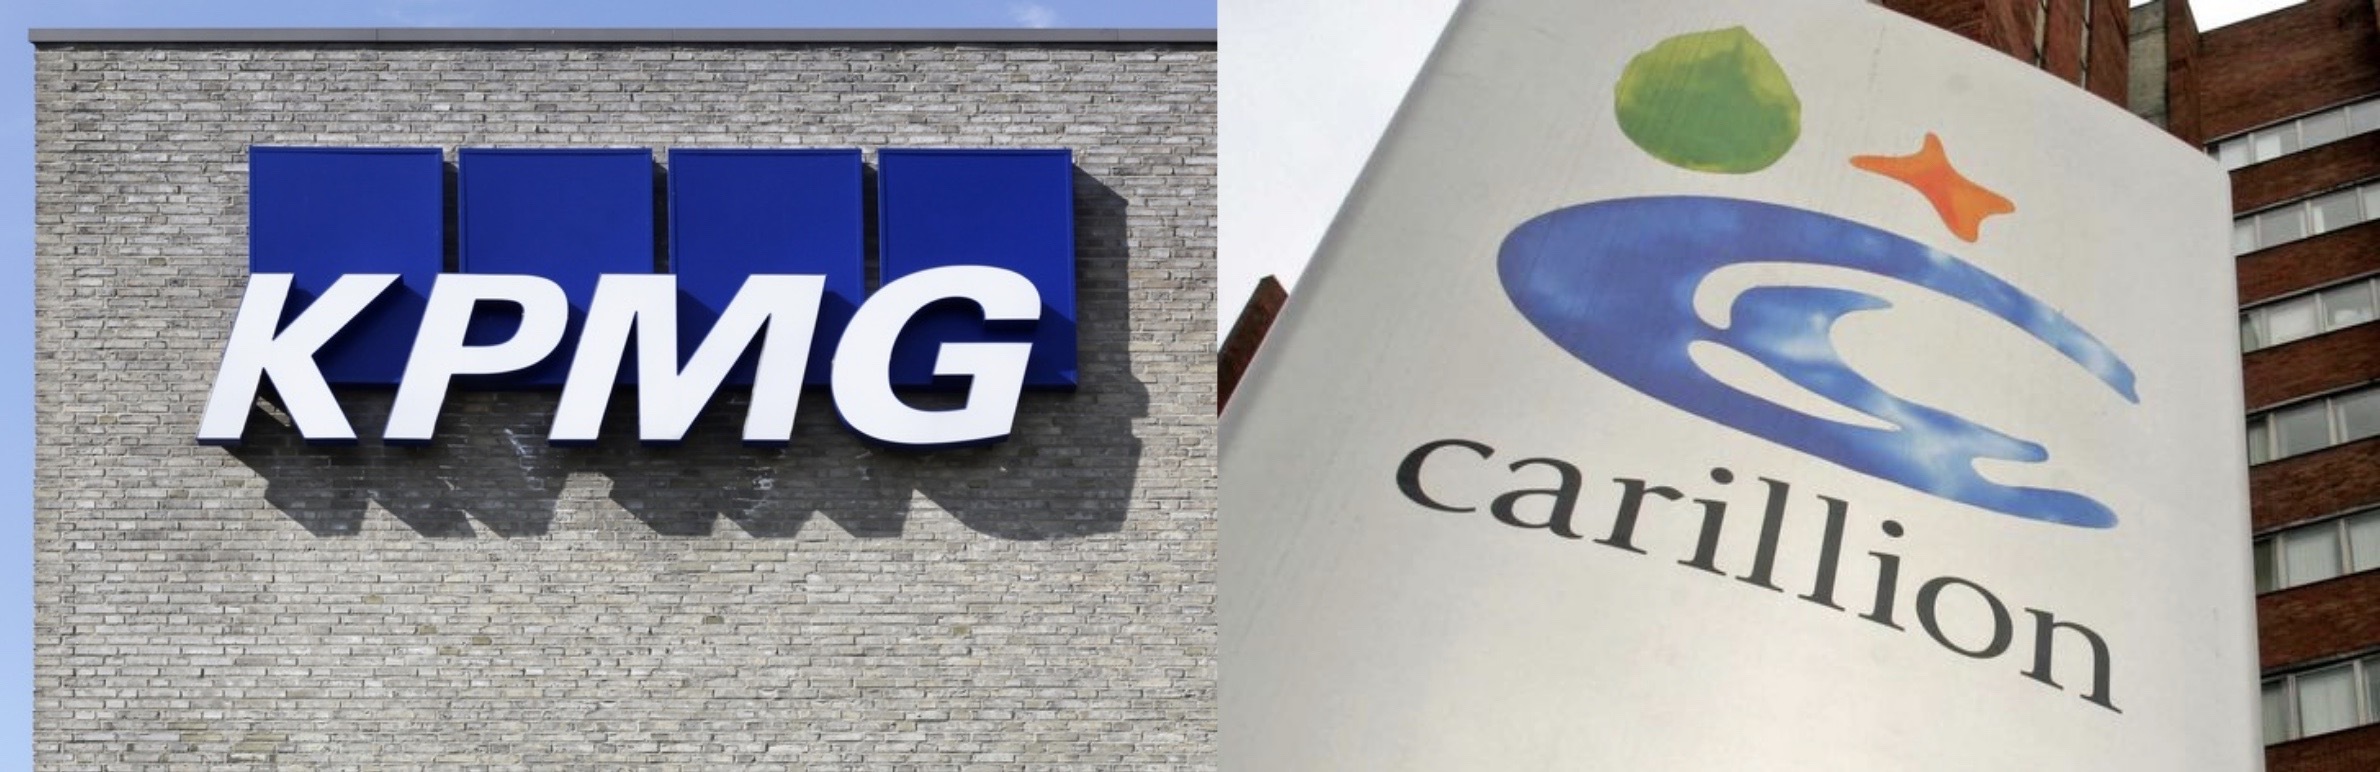 KPMG hit with record £21m fine over Carillion audit failures